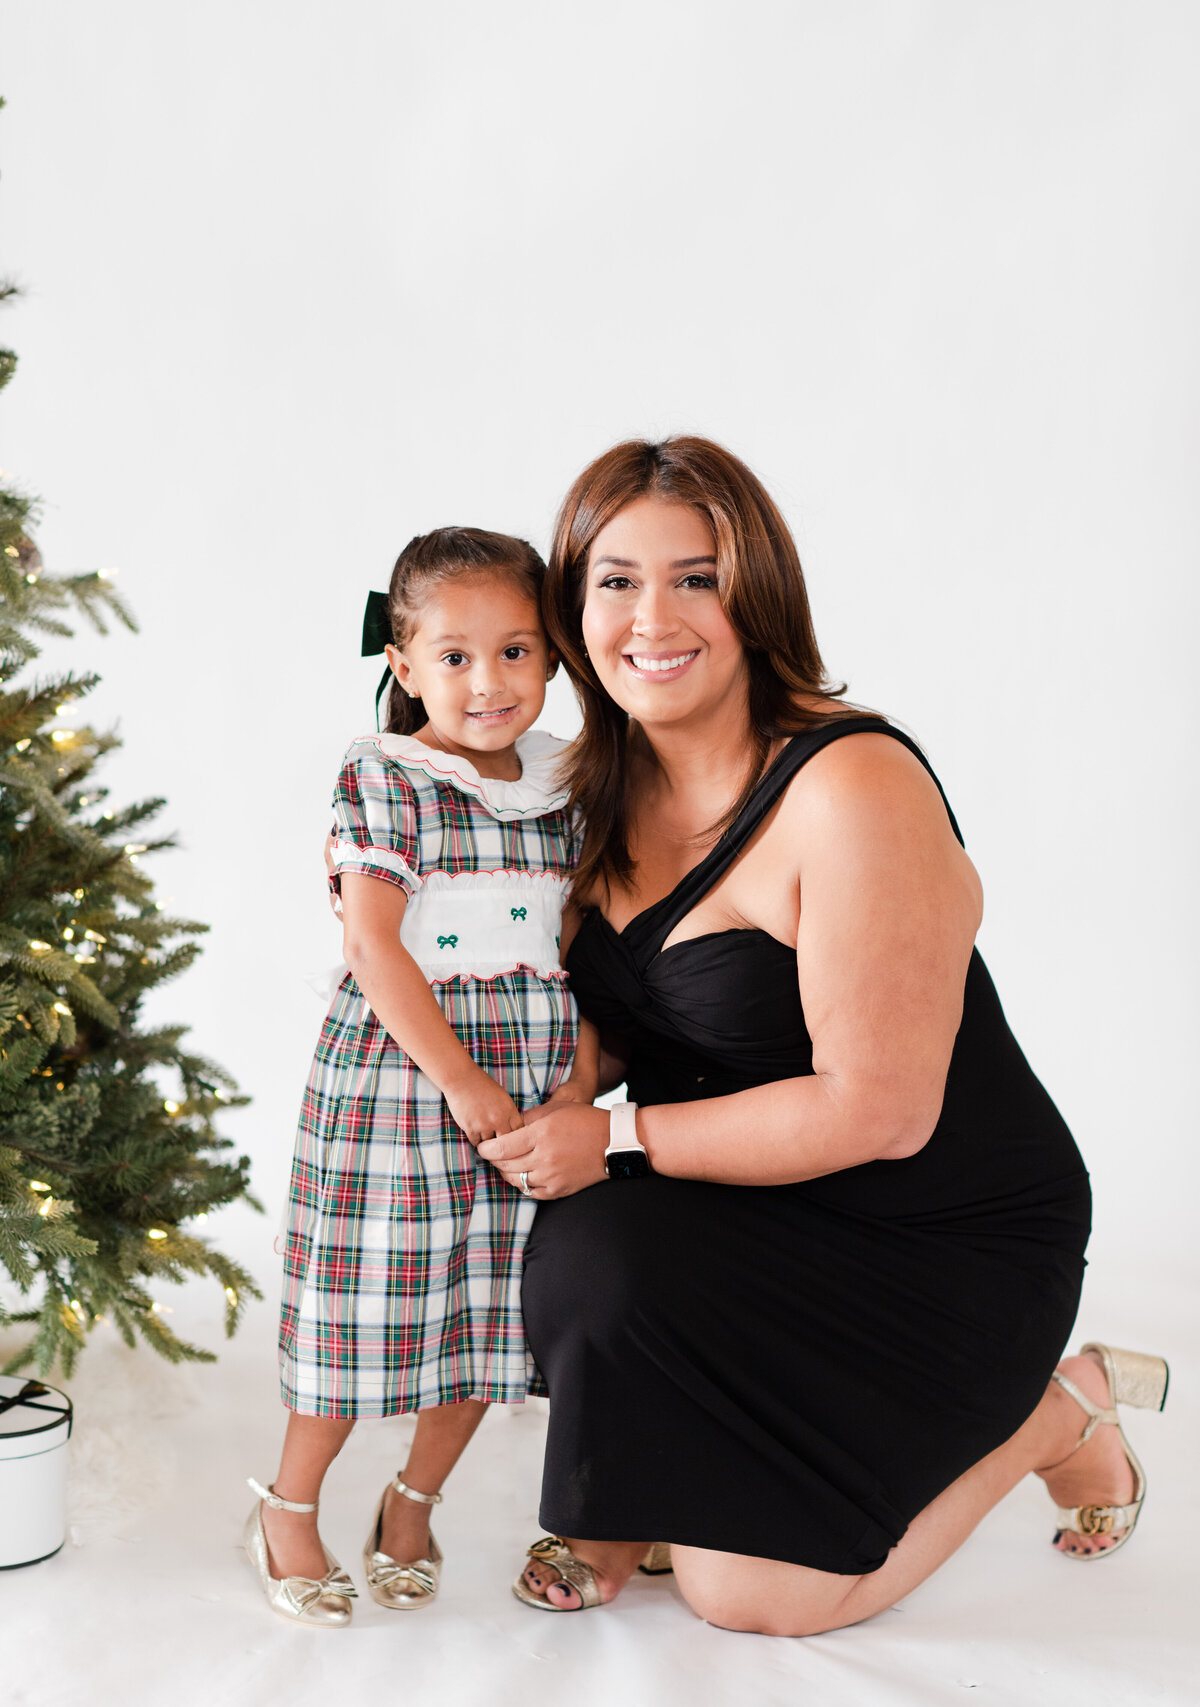 Gallery-2022_11-05 Christmas Minis with Santa Marques Family M Suarez Photography 29MSuarezPhotography